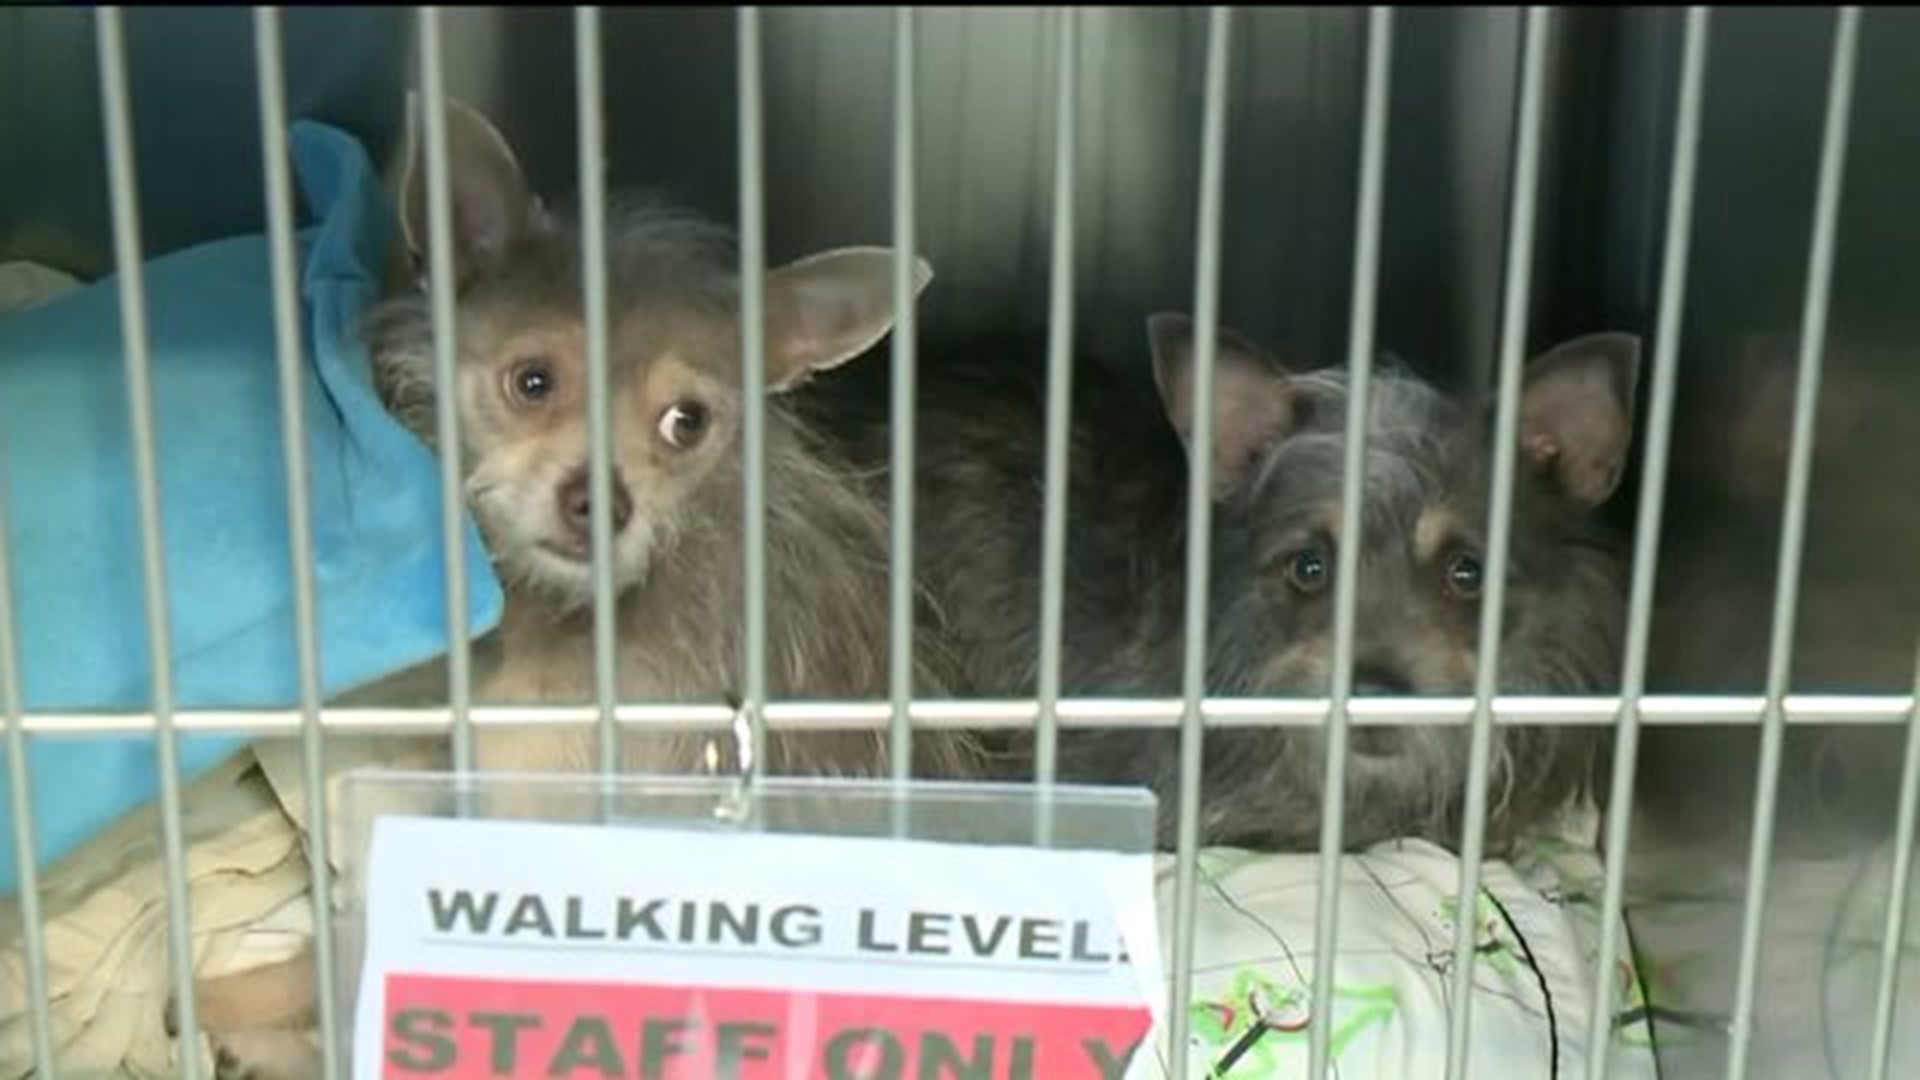 More Dogs Abandoned in Shopping Center Parking Lot